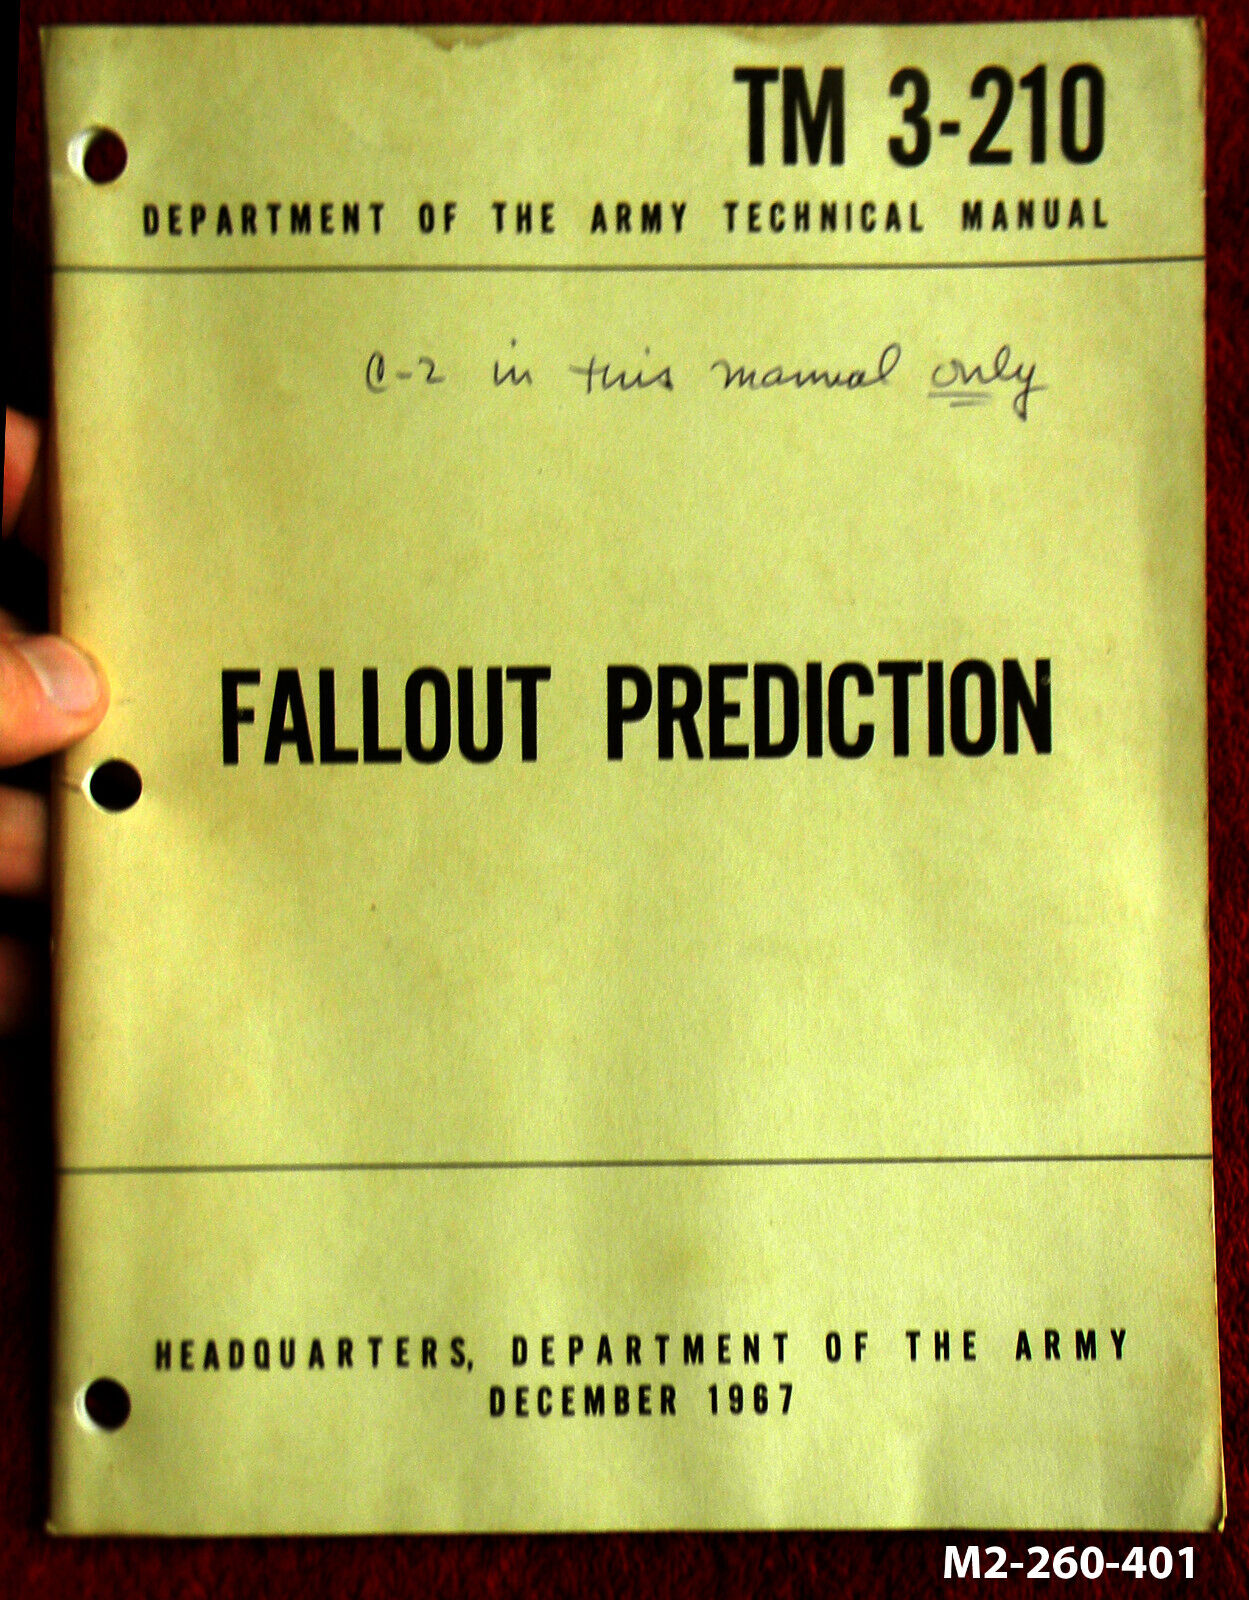 1967 FALLOUT PREDICTION, TM 3-210, Department of the Army Technical